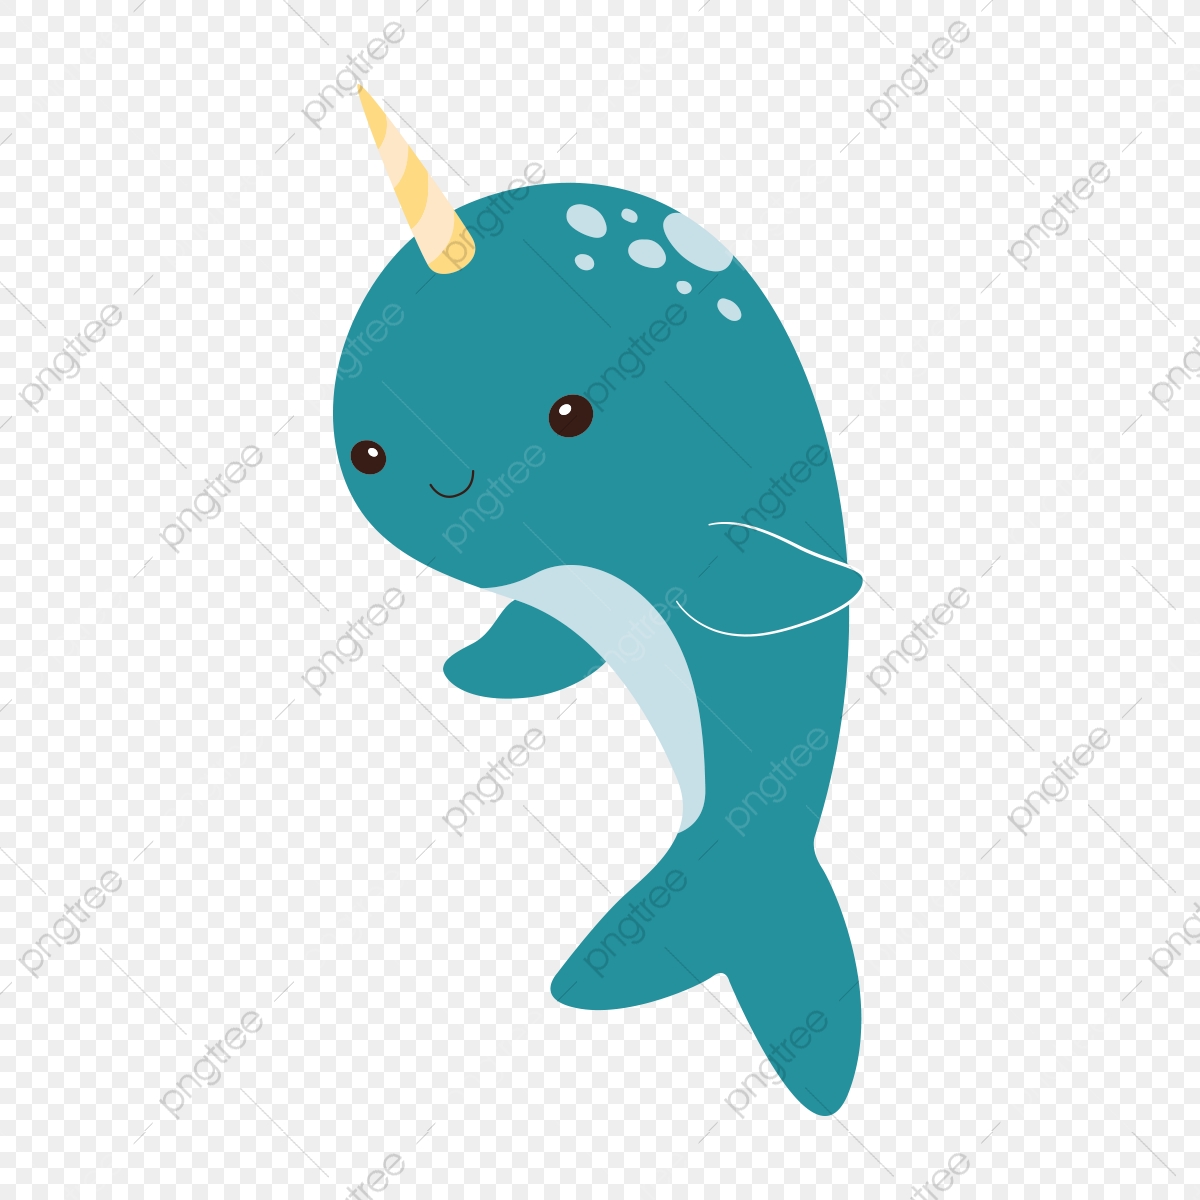 Cute Narwhal Wallpapers